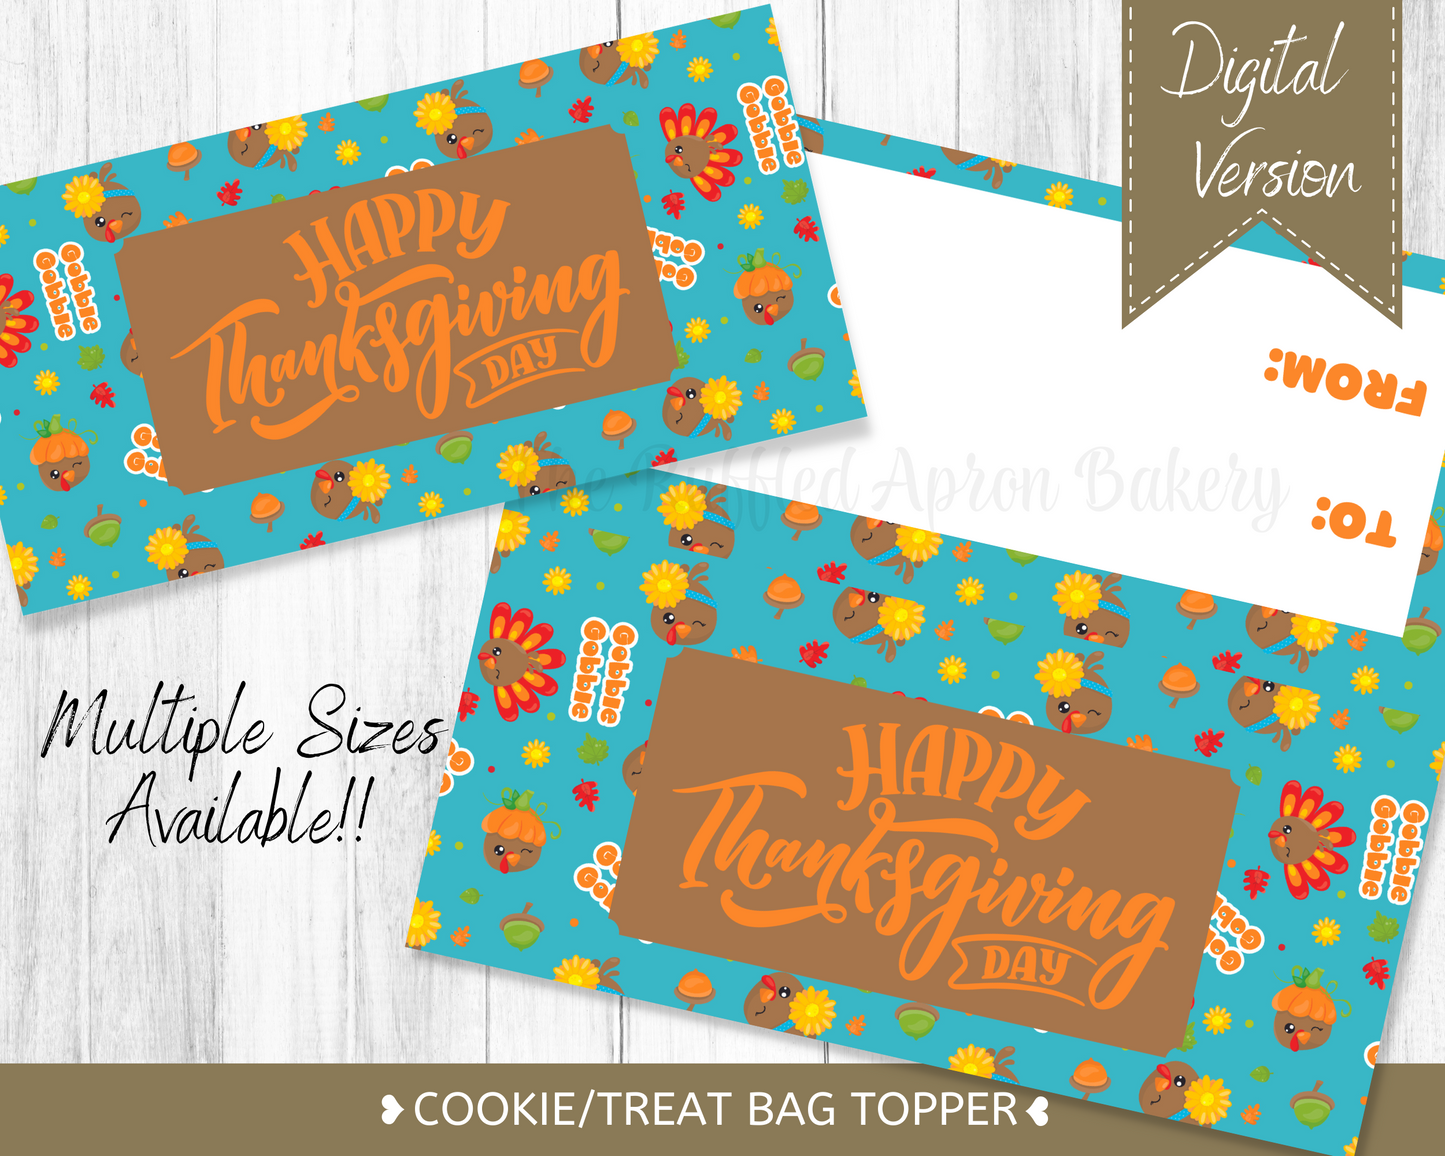 Happy Thanksgiving Day Cookie Bag Topper